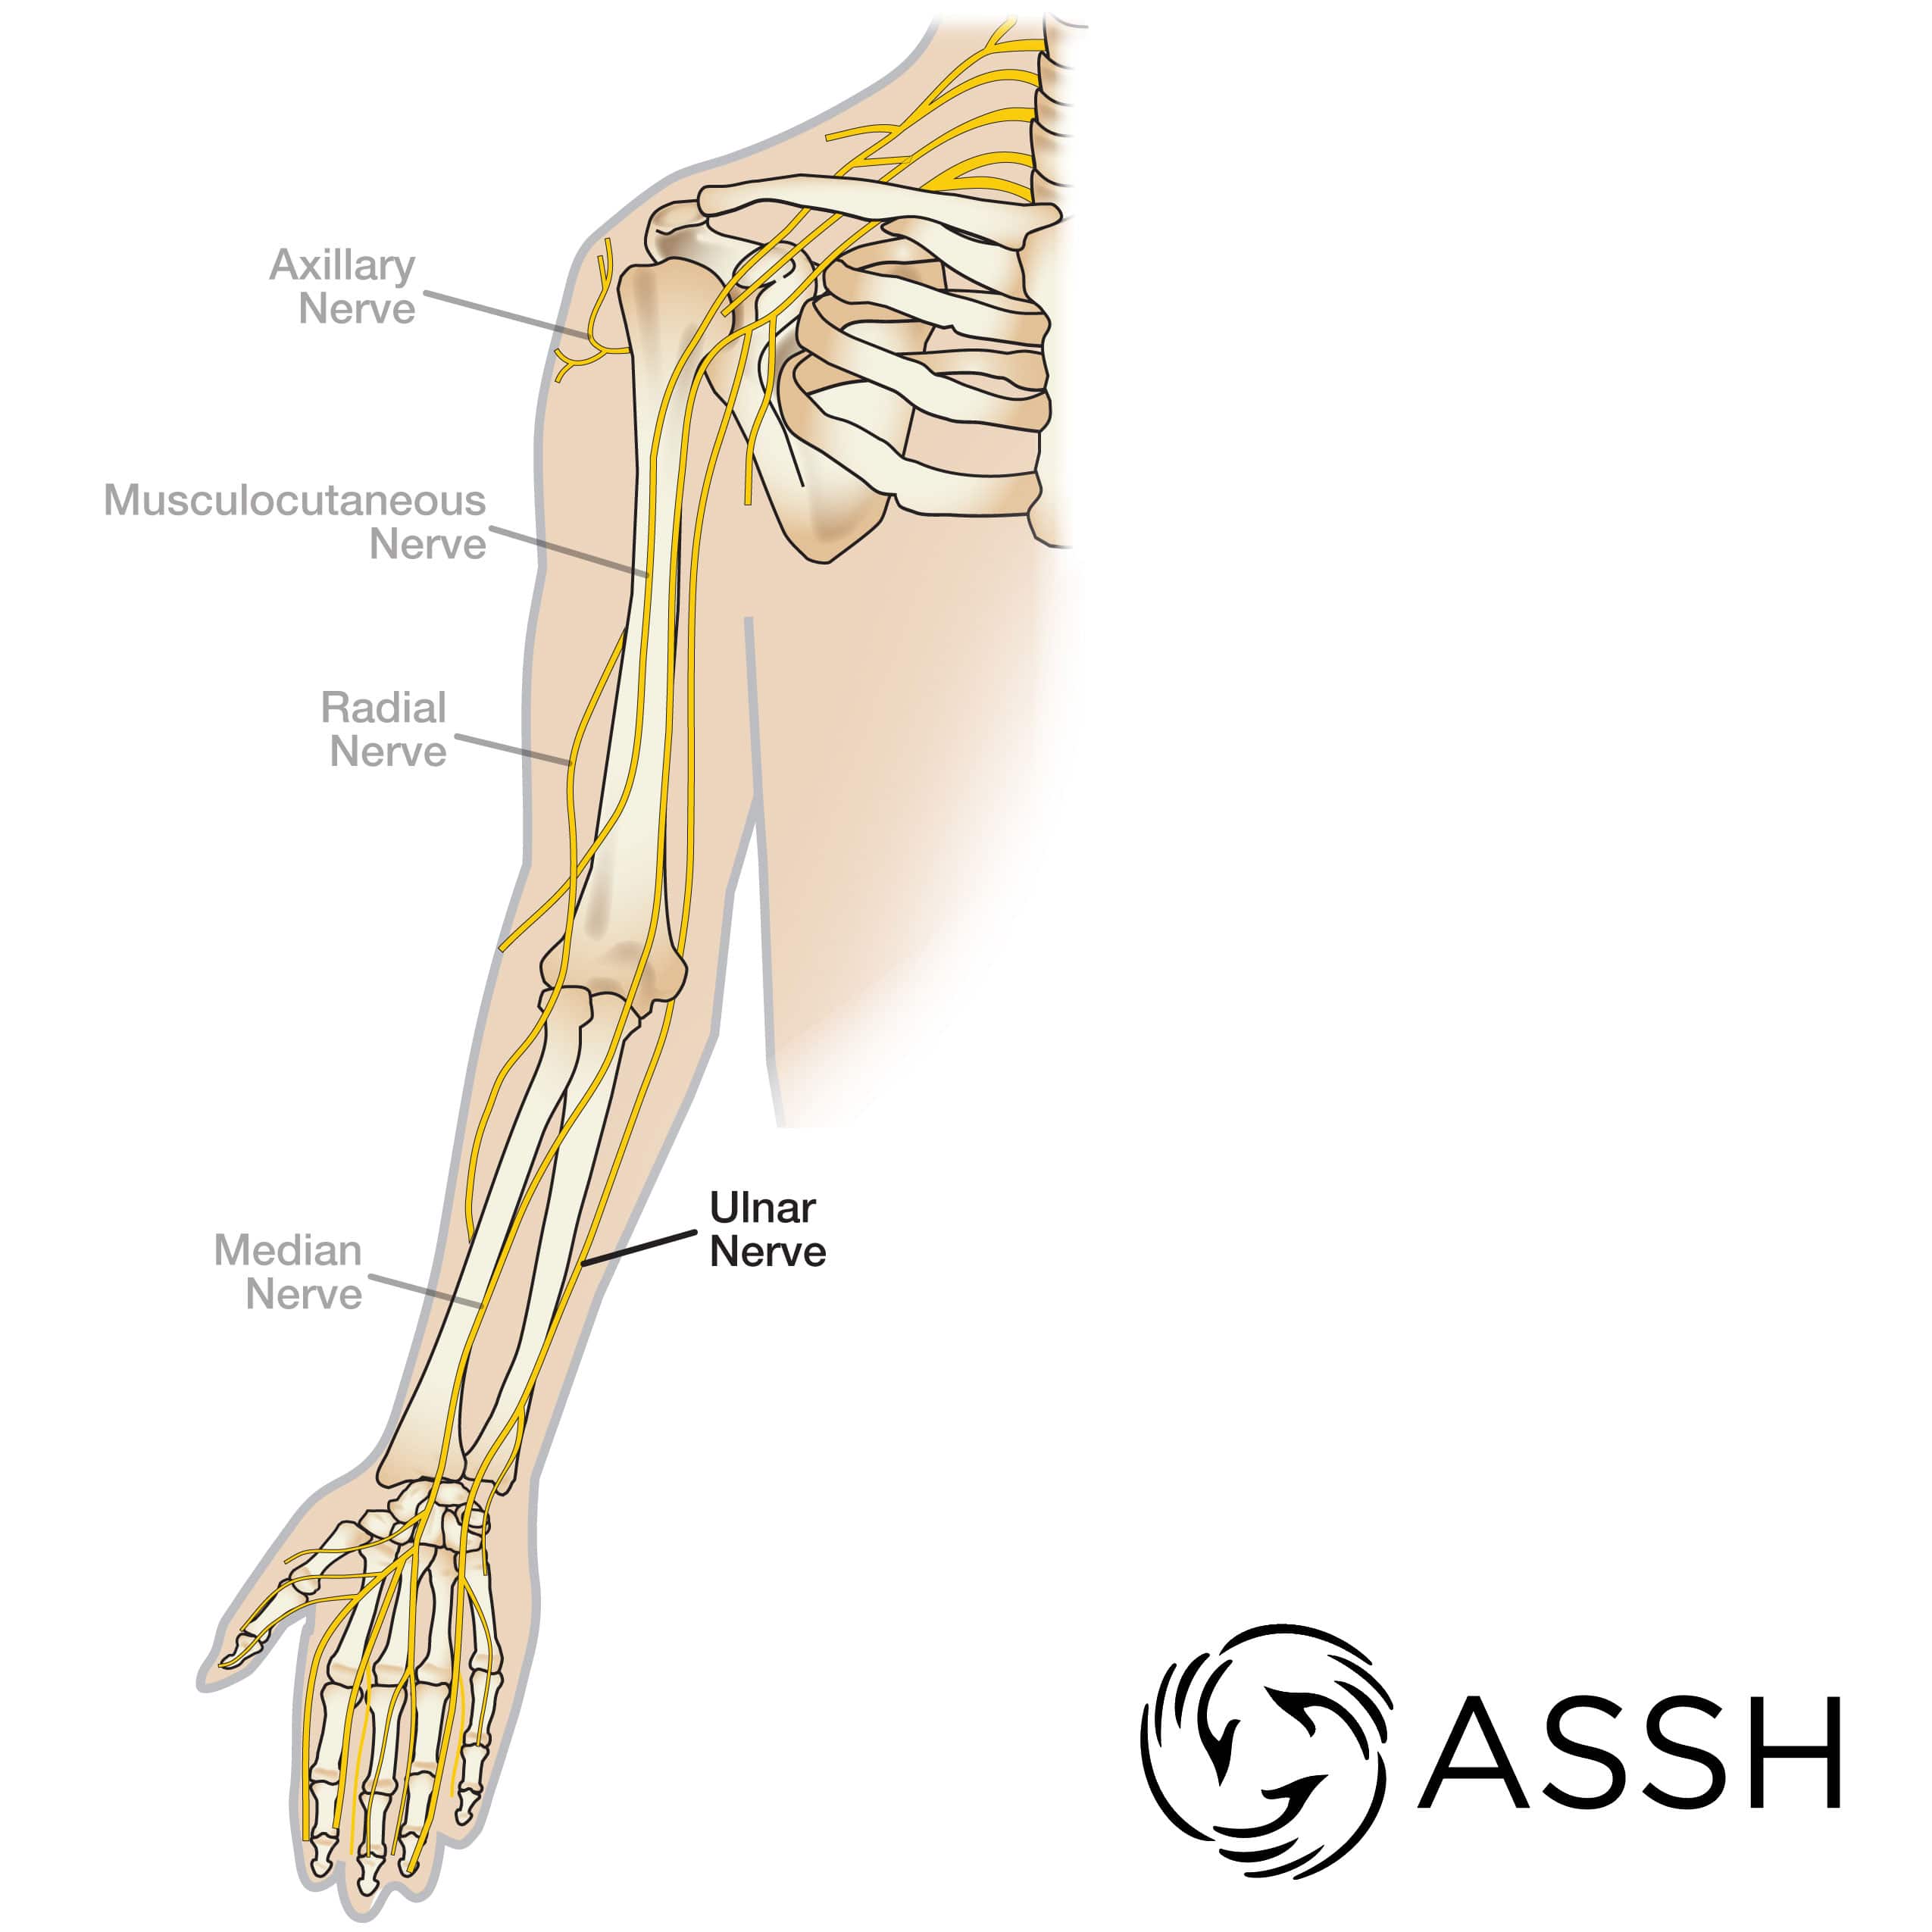 groove for ulnar nerve humerus